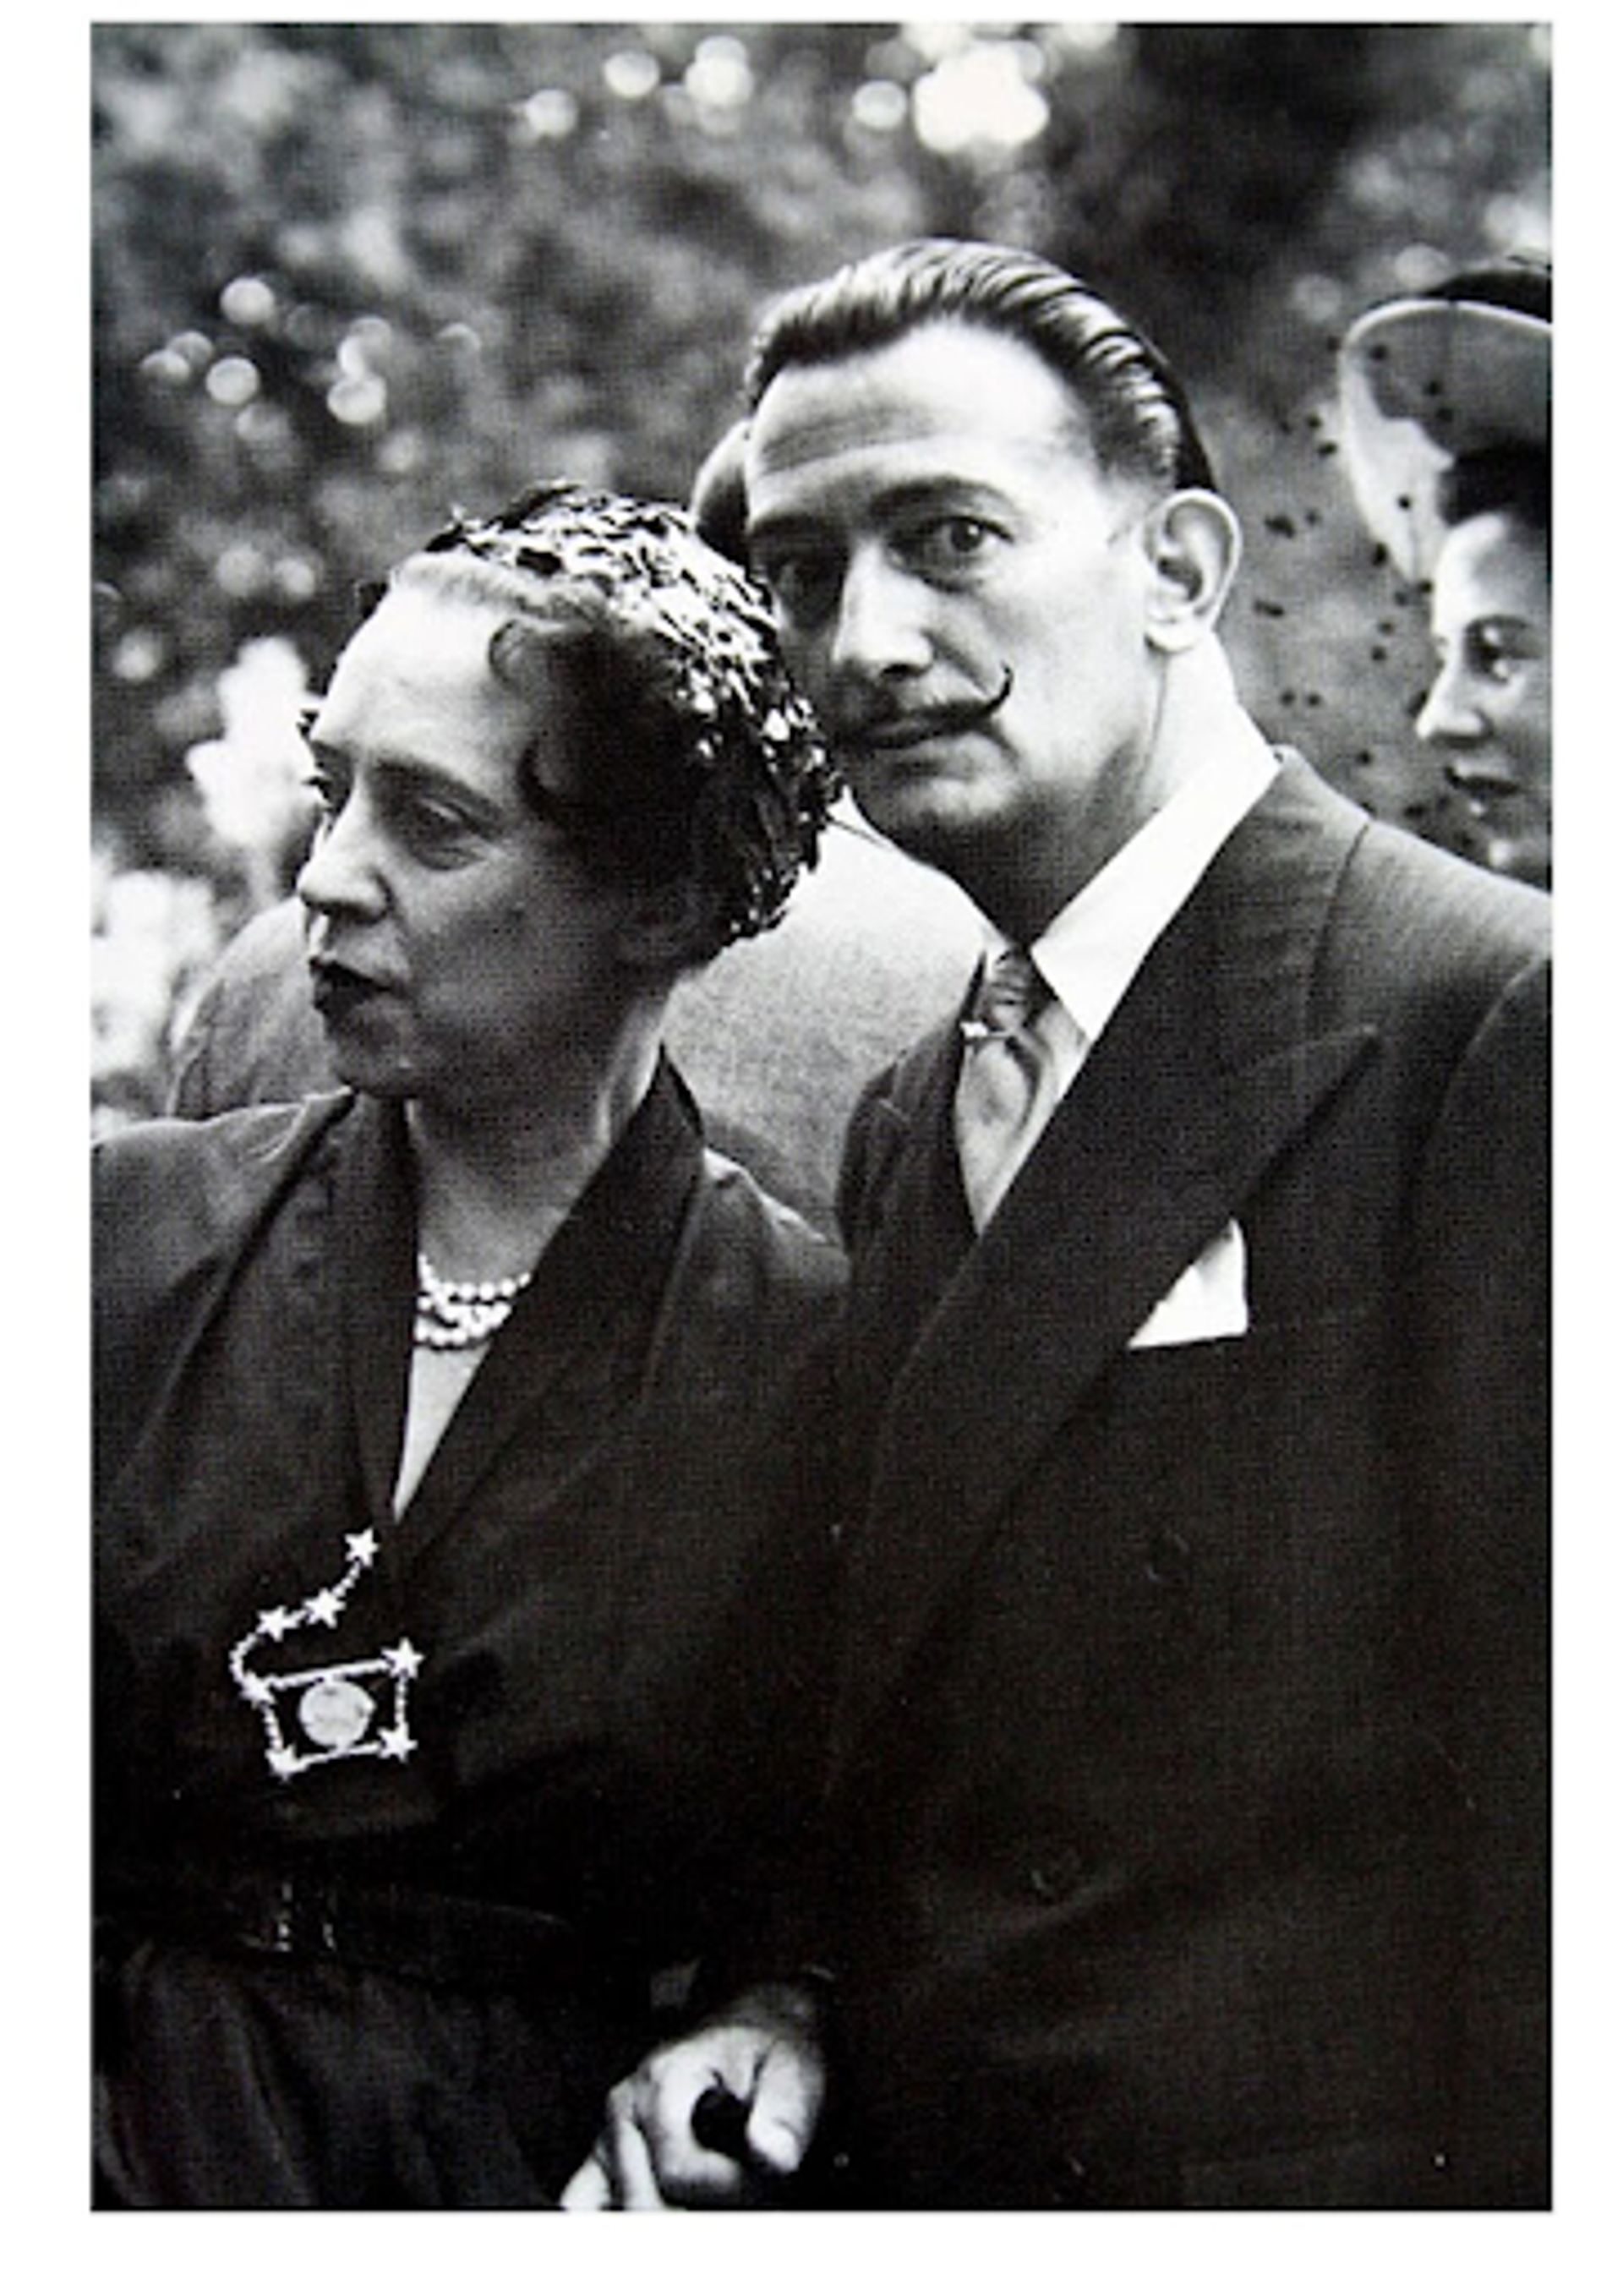 Black and white photograph of Elsa Schiaparelli and Salvador Dalí standing beside one another.